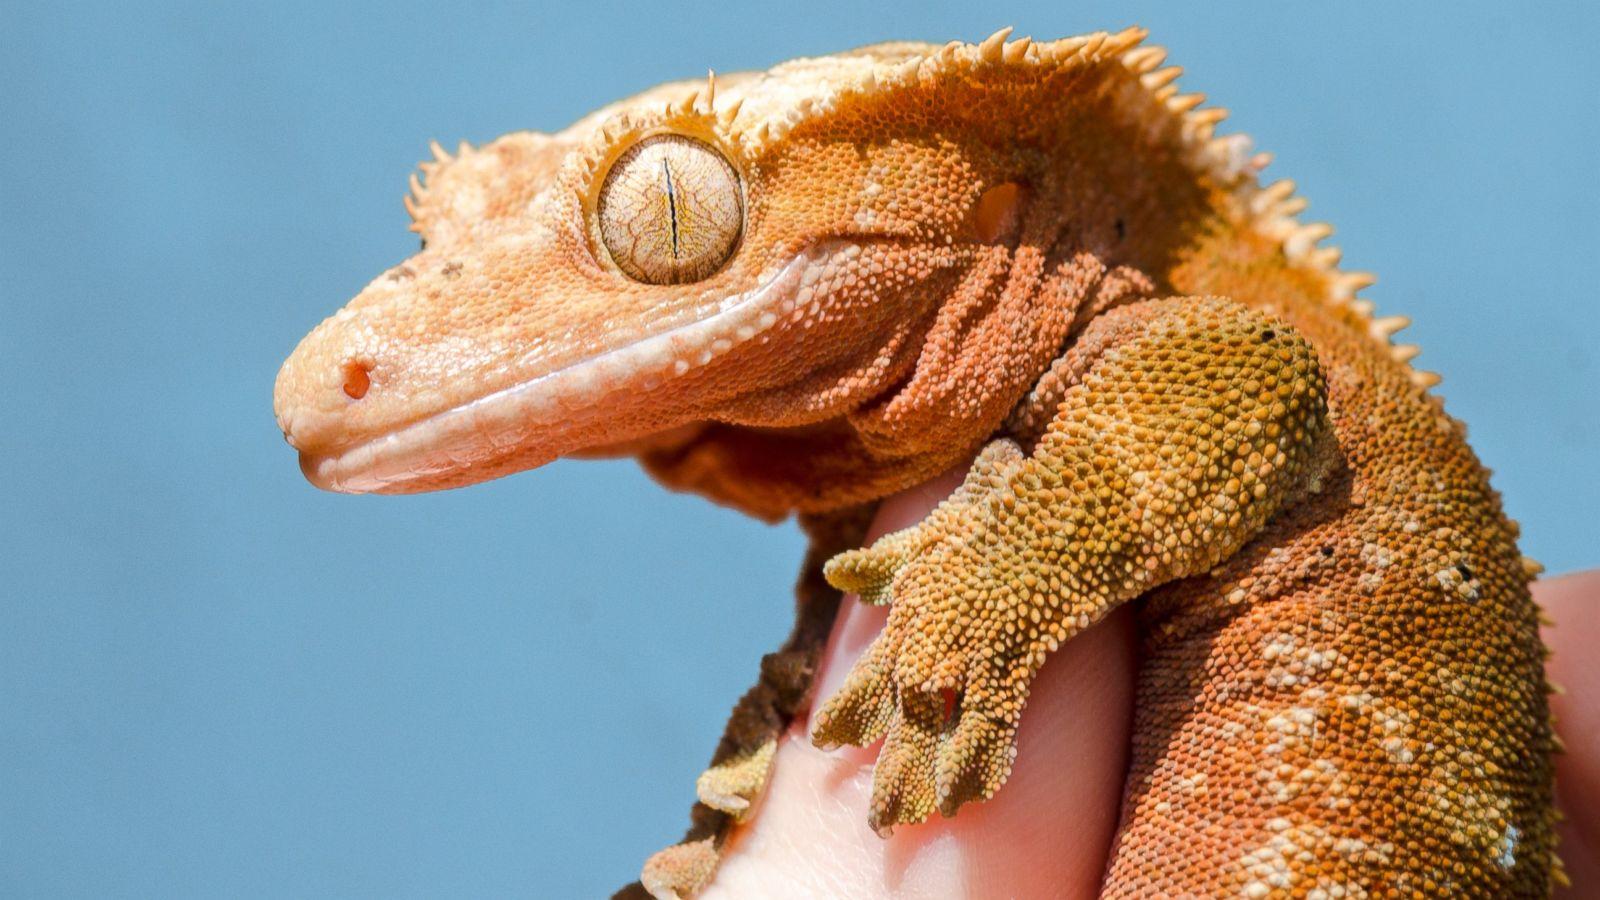 Geckos Linked to Dangerous Salmonella Outbreak in 16 States